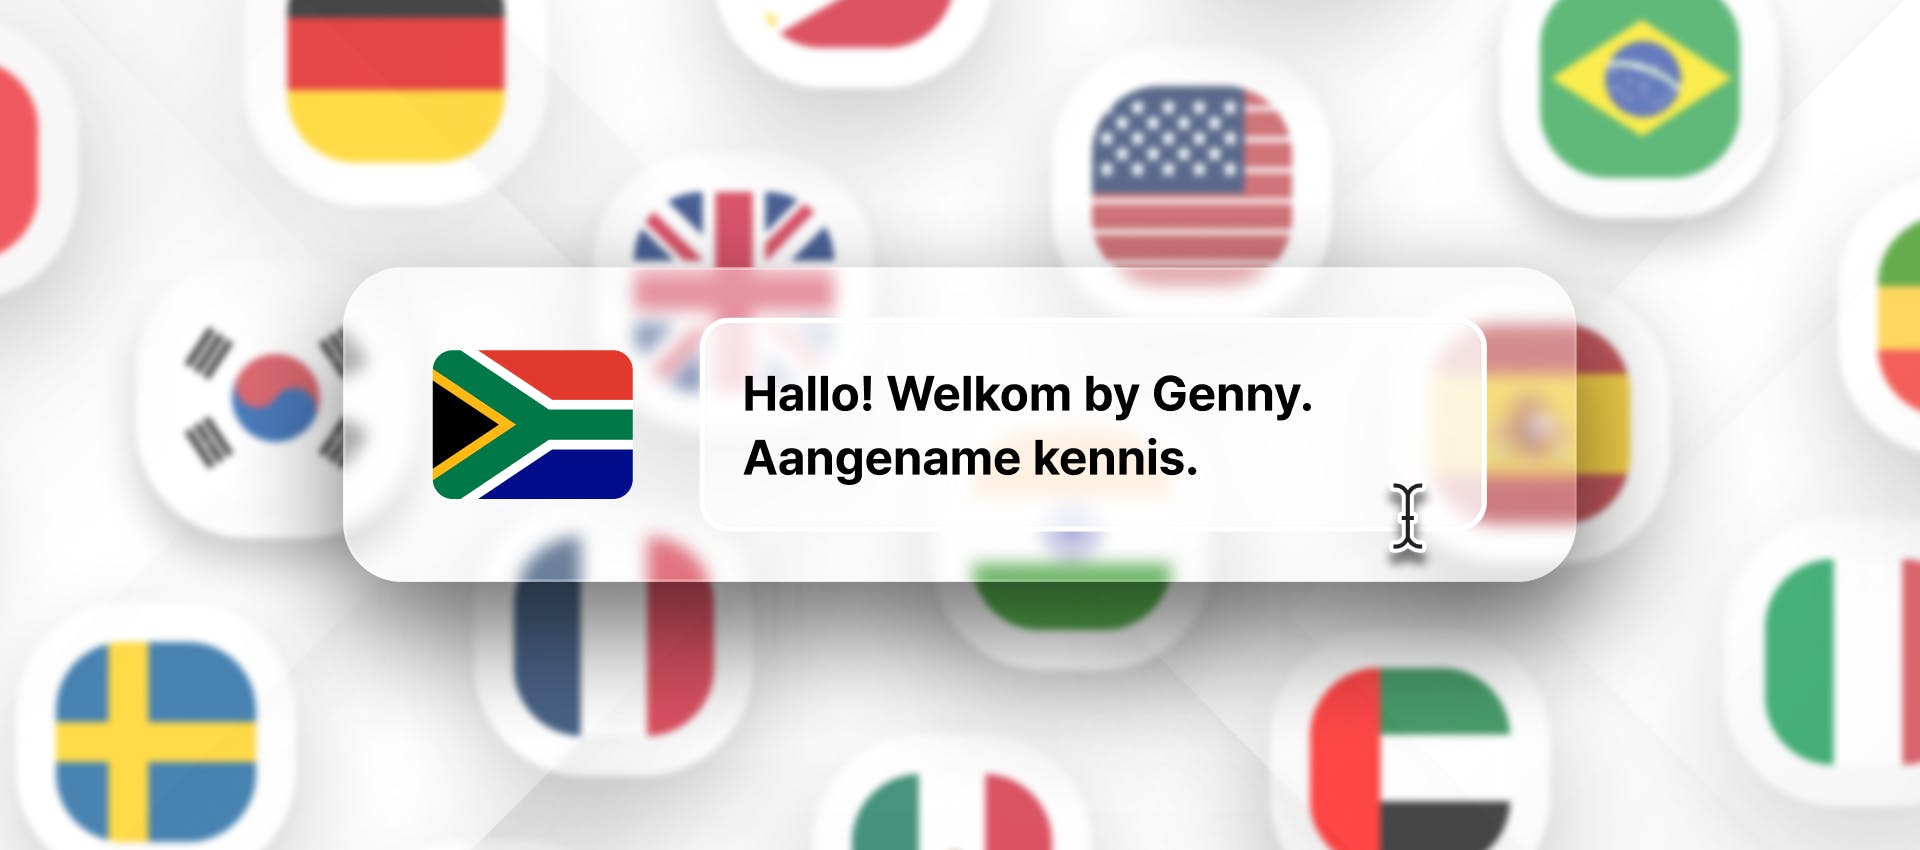 Afrikaans phrase for Afrikaans TTS generation with different flags in the background